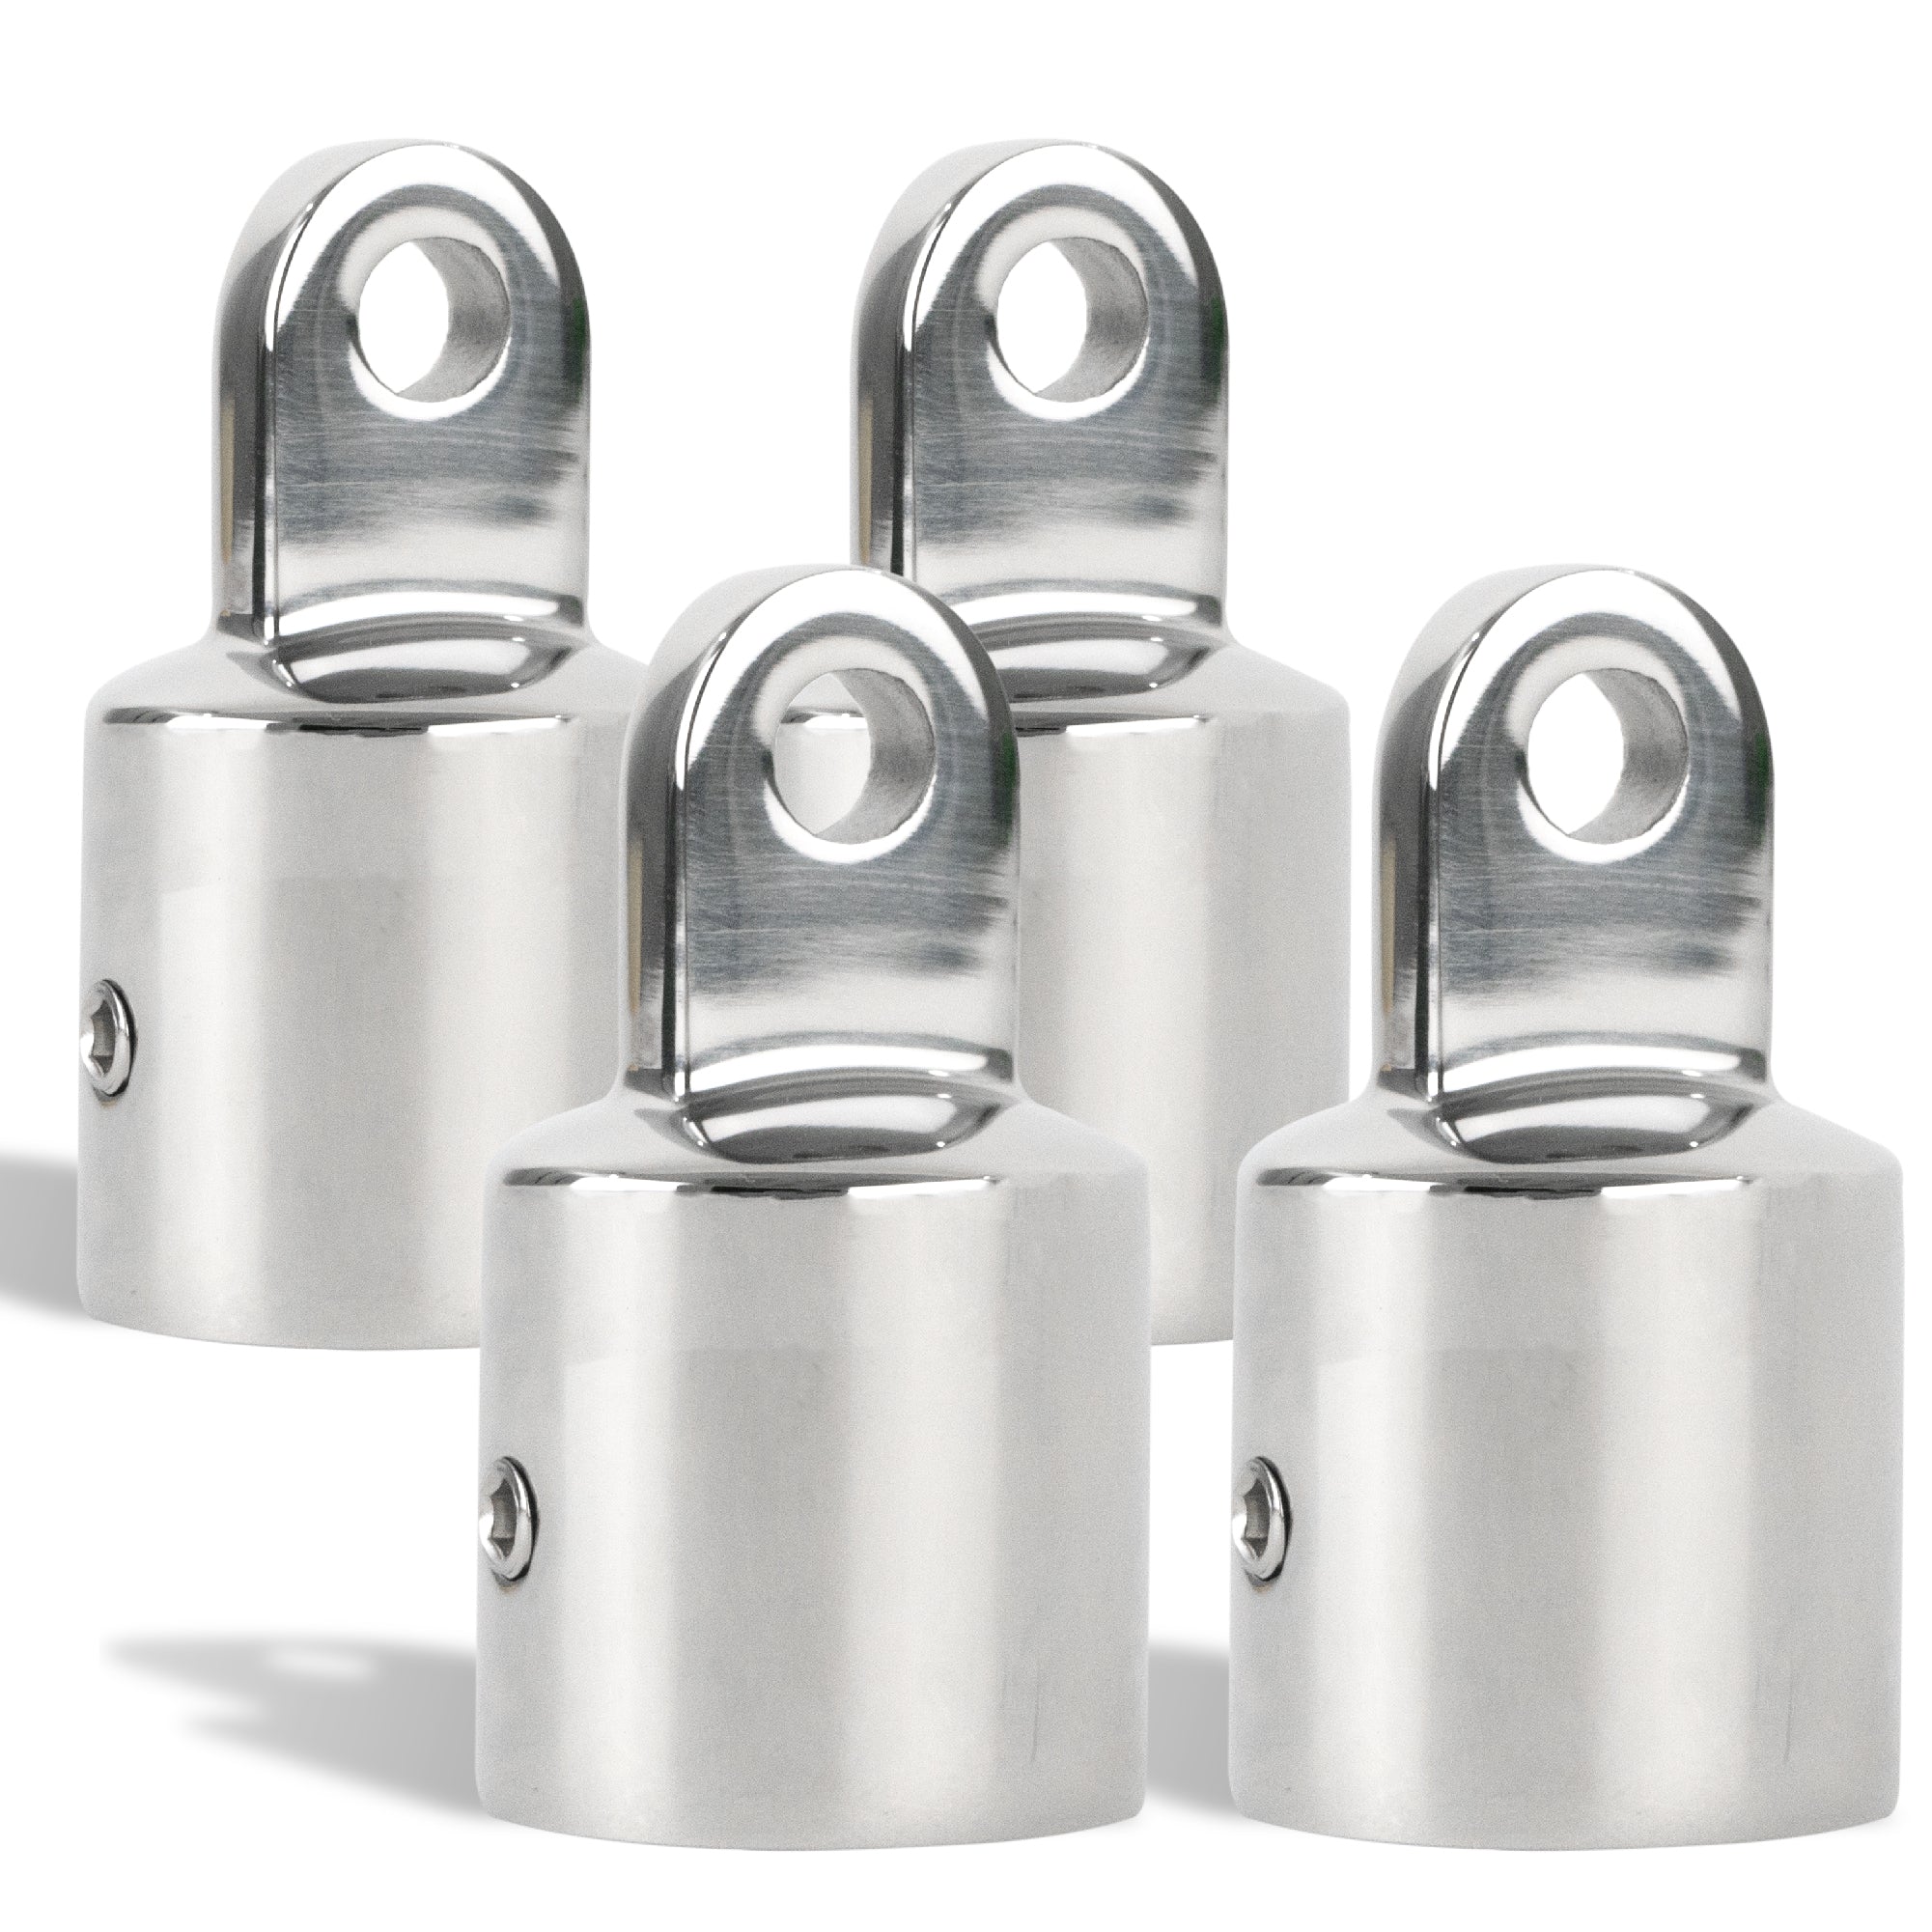 Bimini Top External Eye End, 7/8" AISI316 Stainless Steel, 4-Pack - FO368-M4